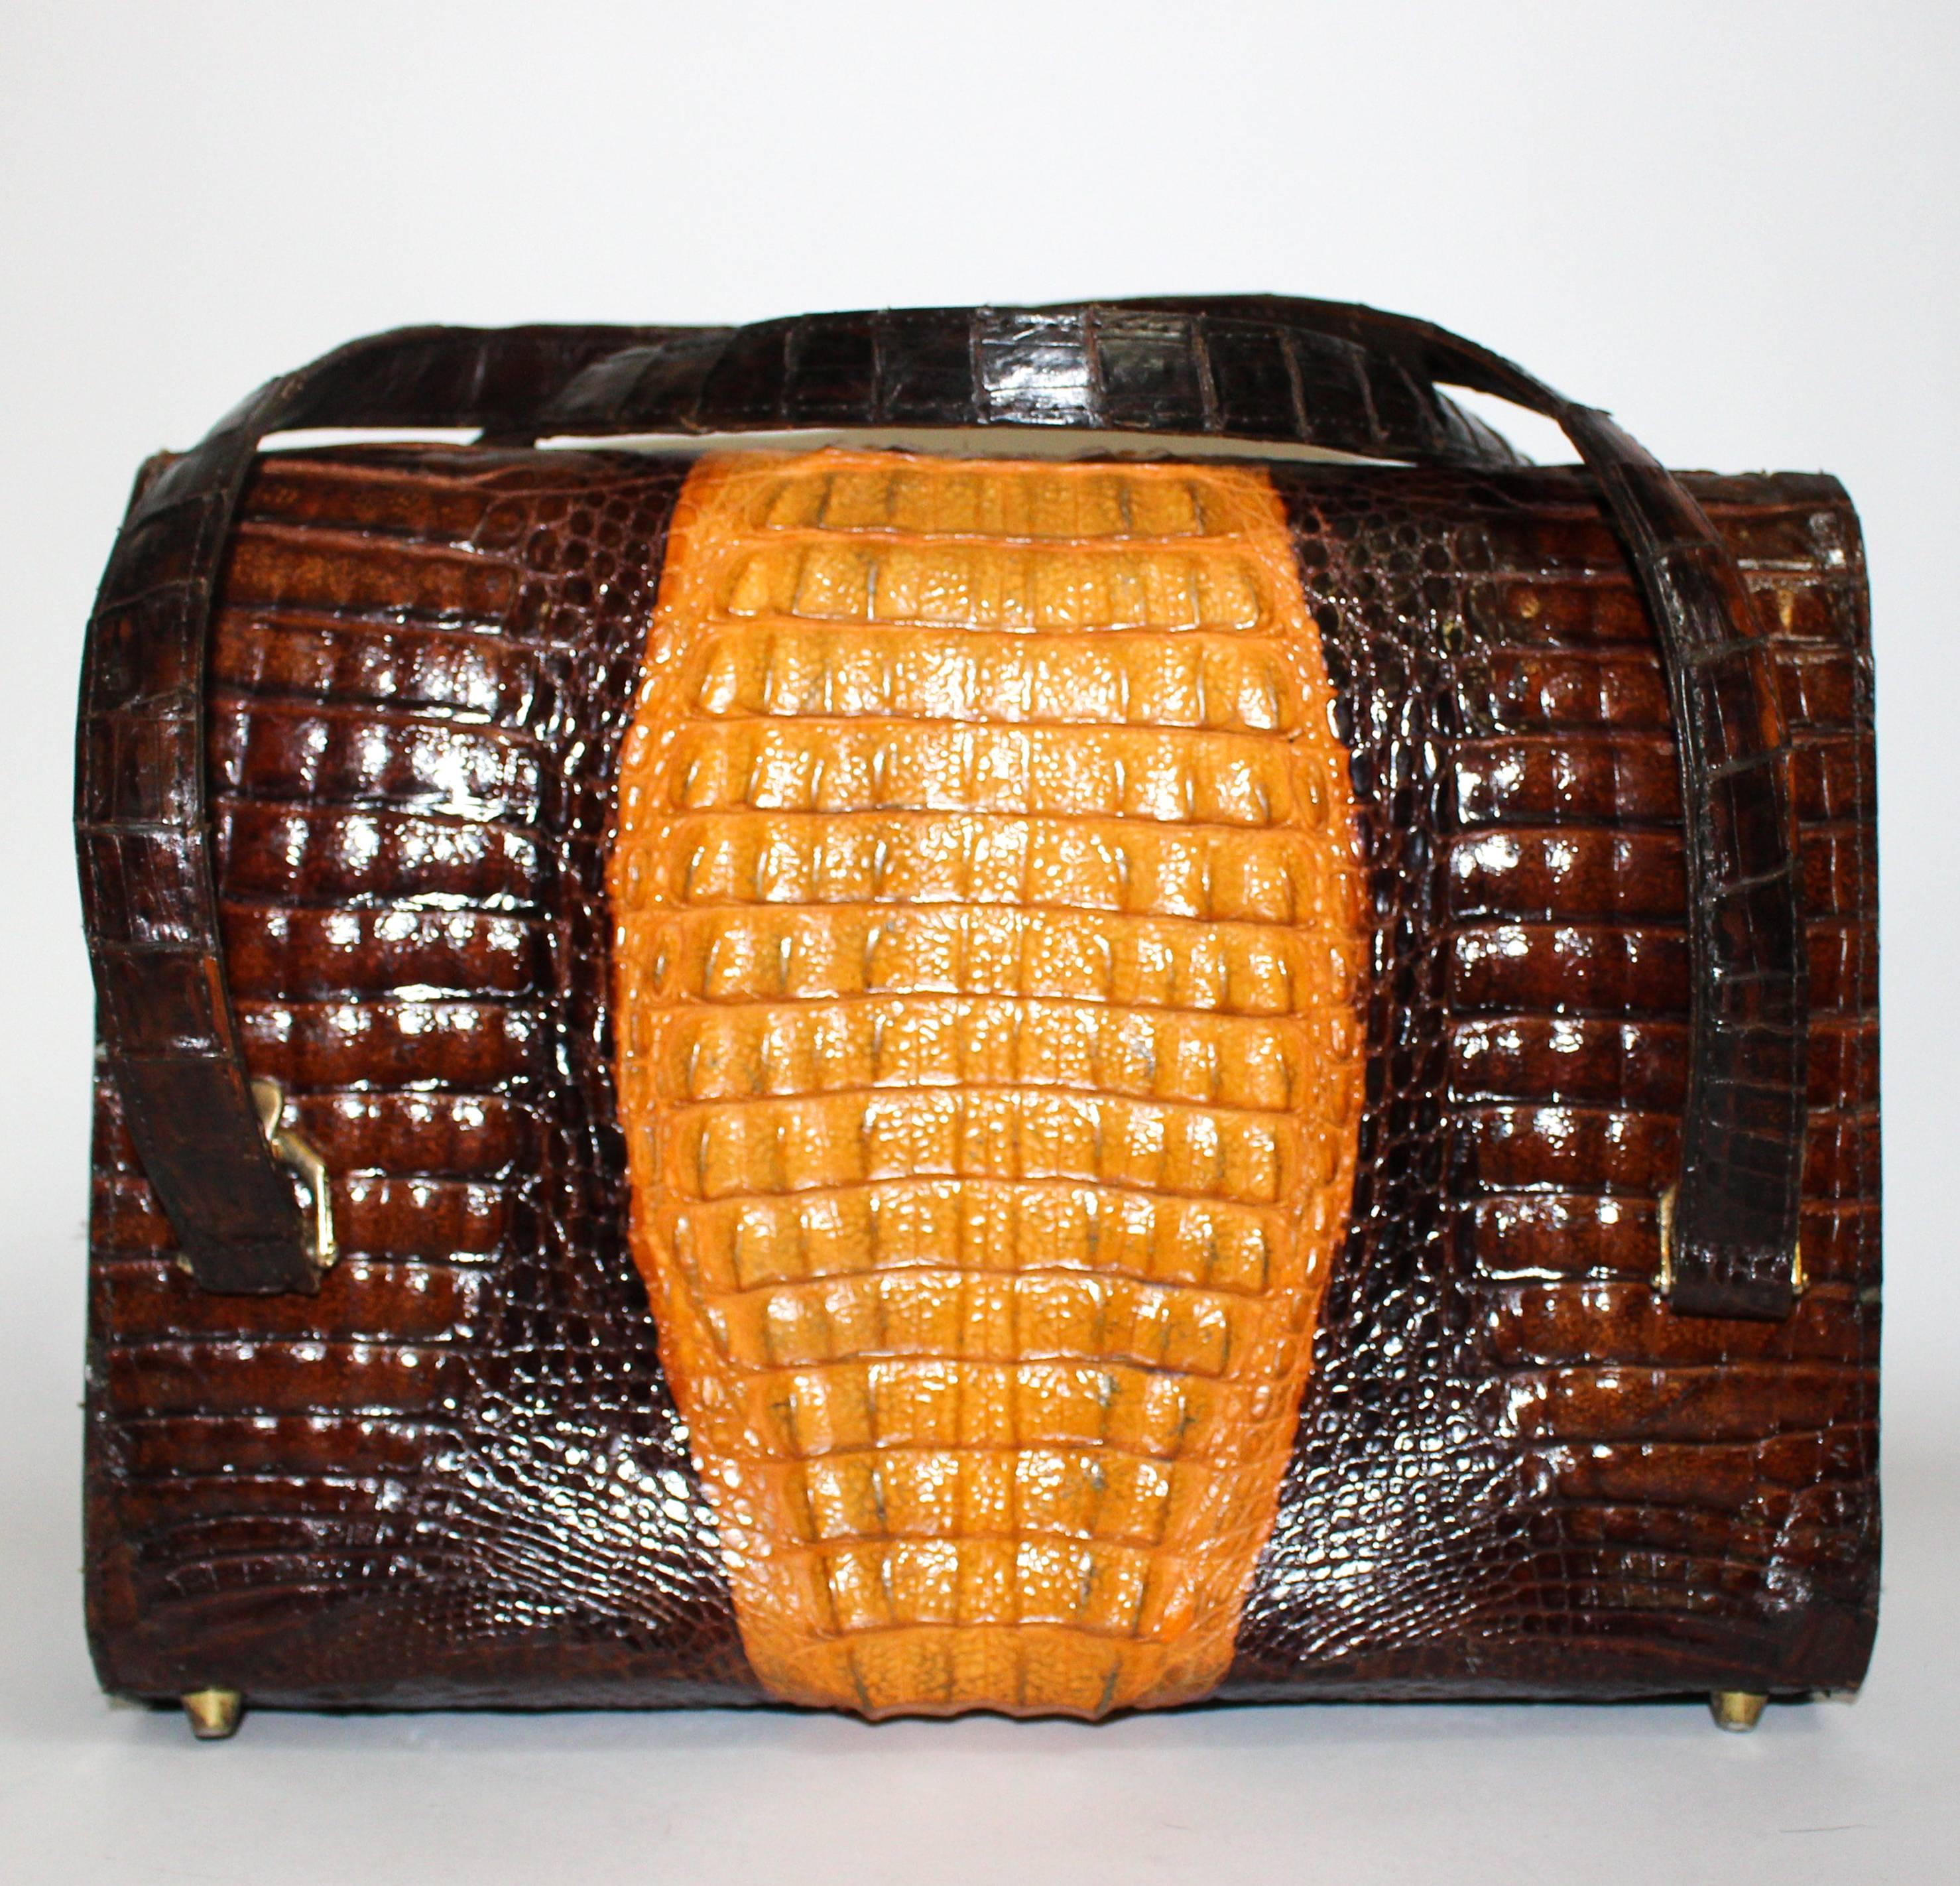 1970s bicolour alligator satchel. Gold-toned hardware. Has metal feet. Leather lining. Three full compartments plus three additional pockets.

Strap length: 26